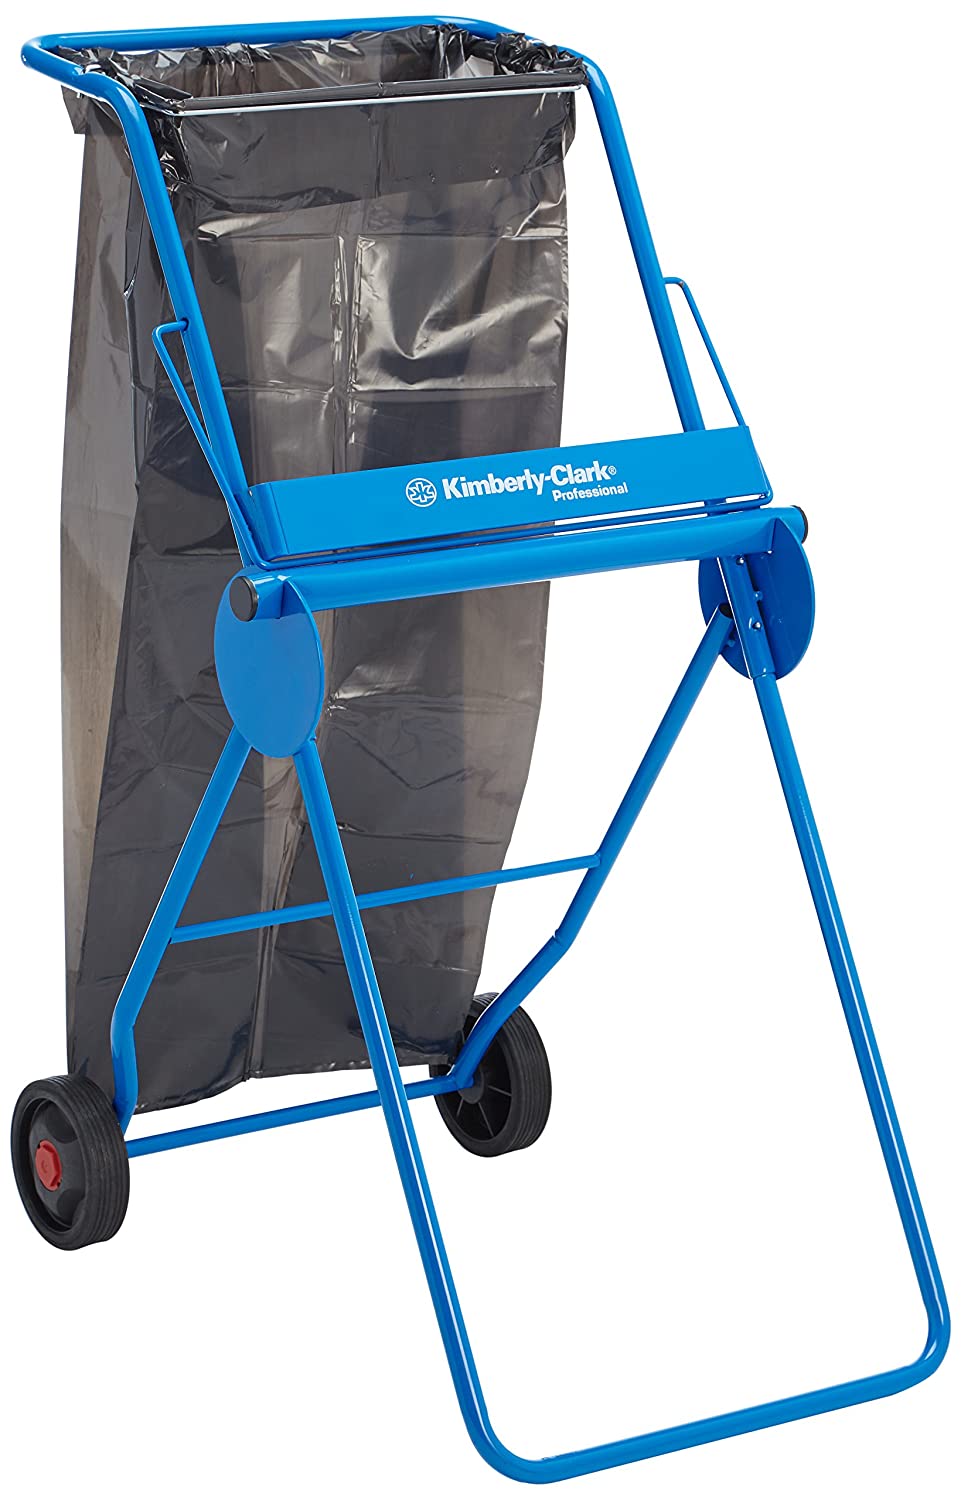 Kimberly-Clark Professional™ Mobile Stand Large Roll Wiper Dispenser 6155 -  Large Blue Roll Dispenser - 1 x Blue Mobile Wiper Dispenser